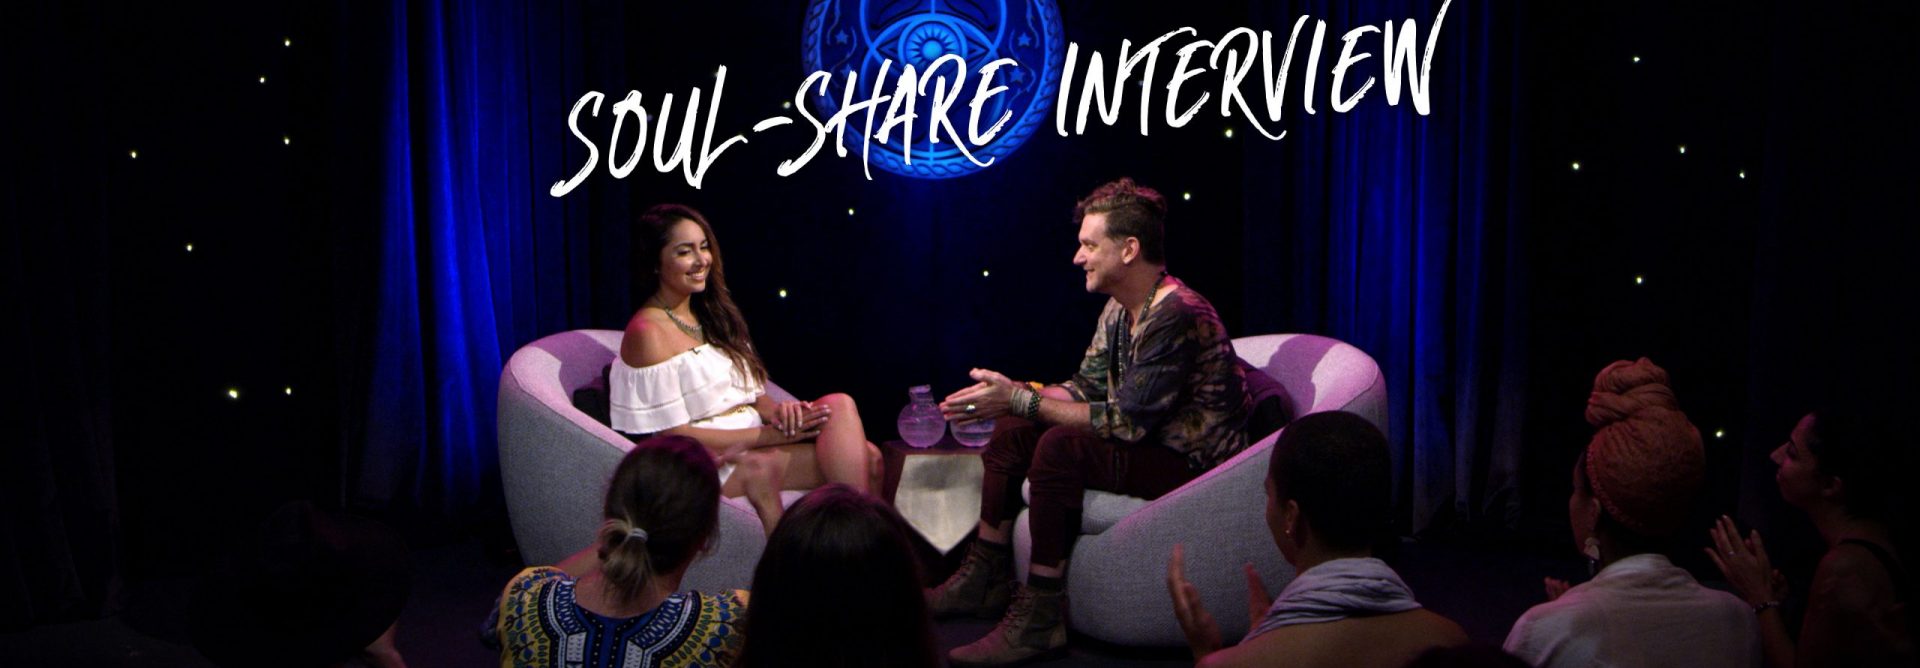 Soul-Share-Interview-S01E02-opt